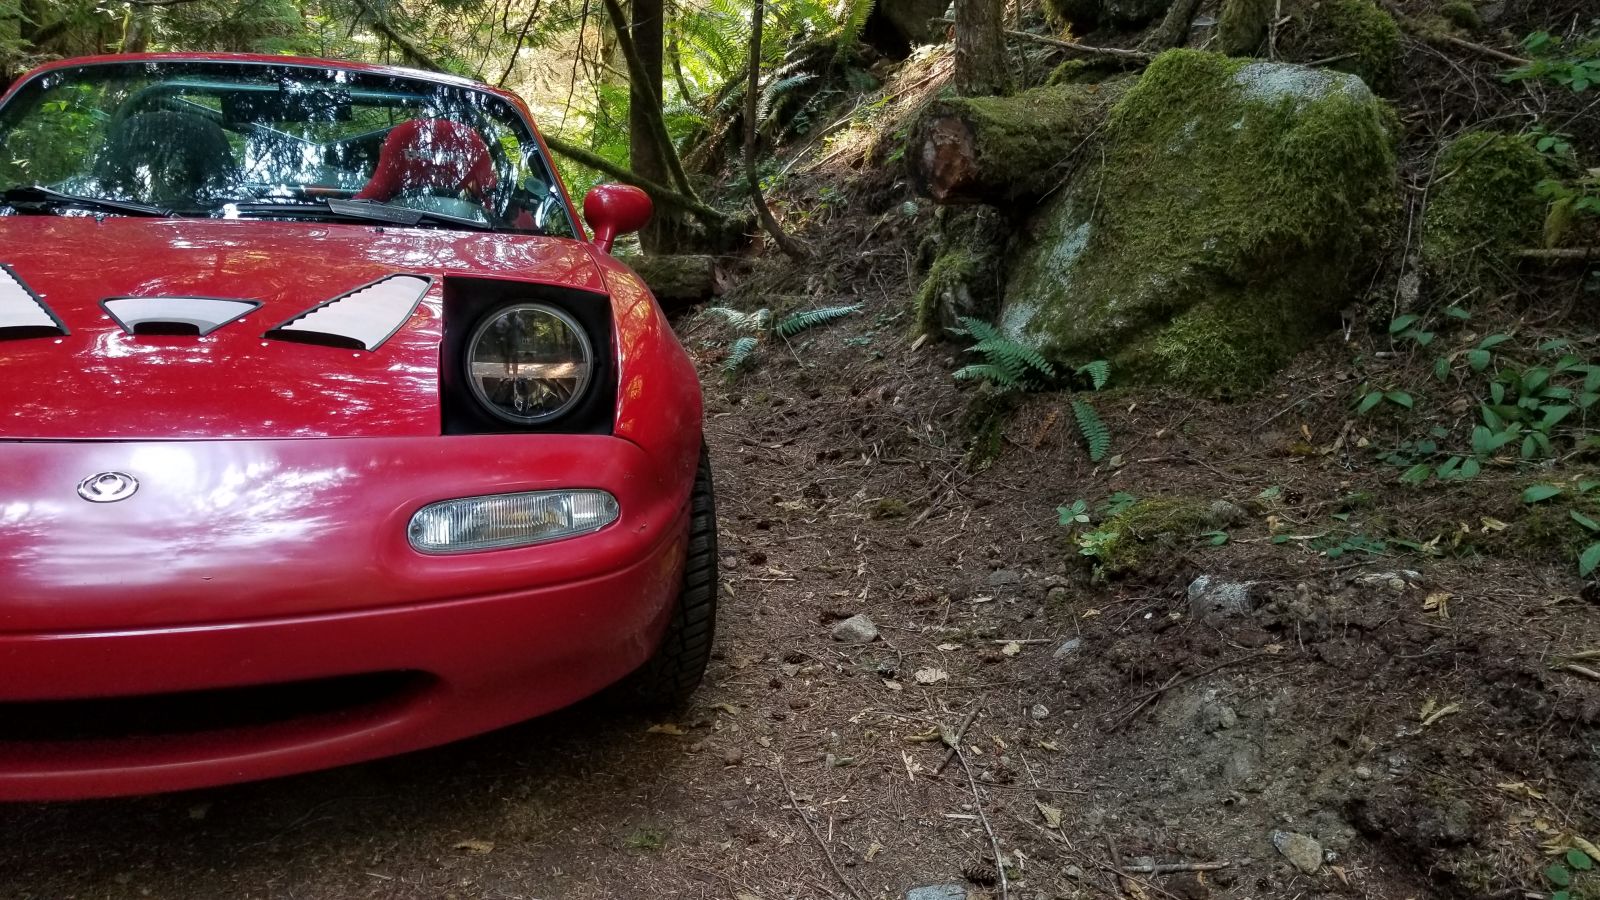 Illustration for article titled Miata down